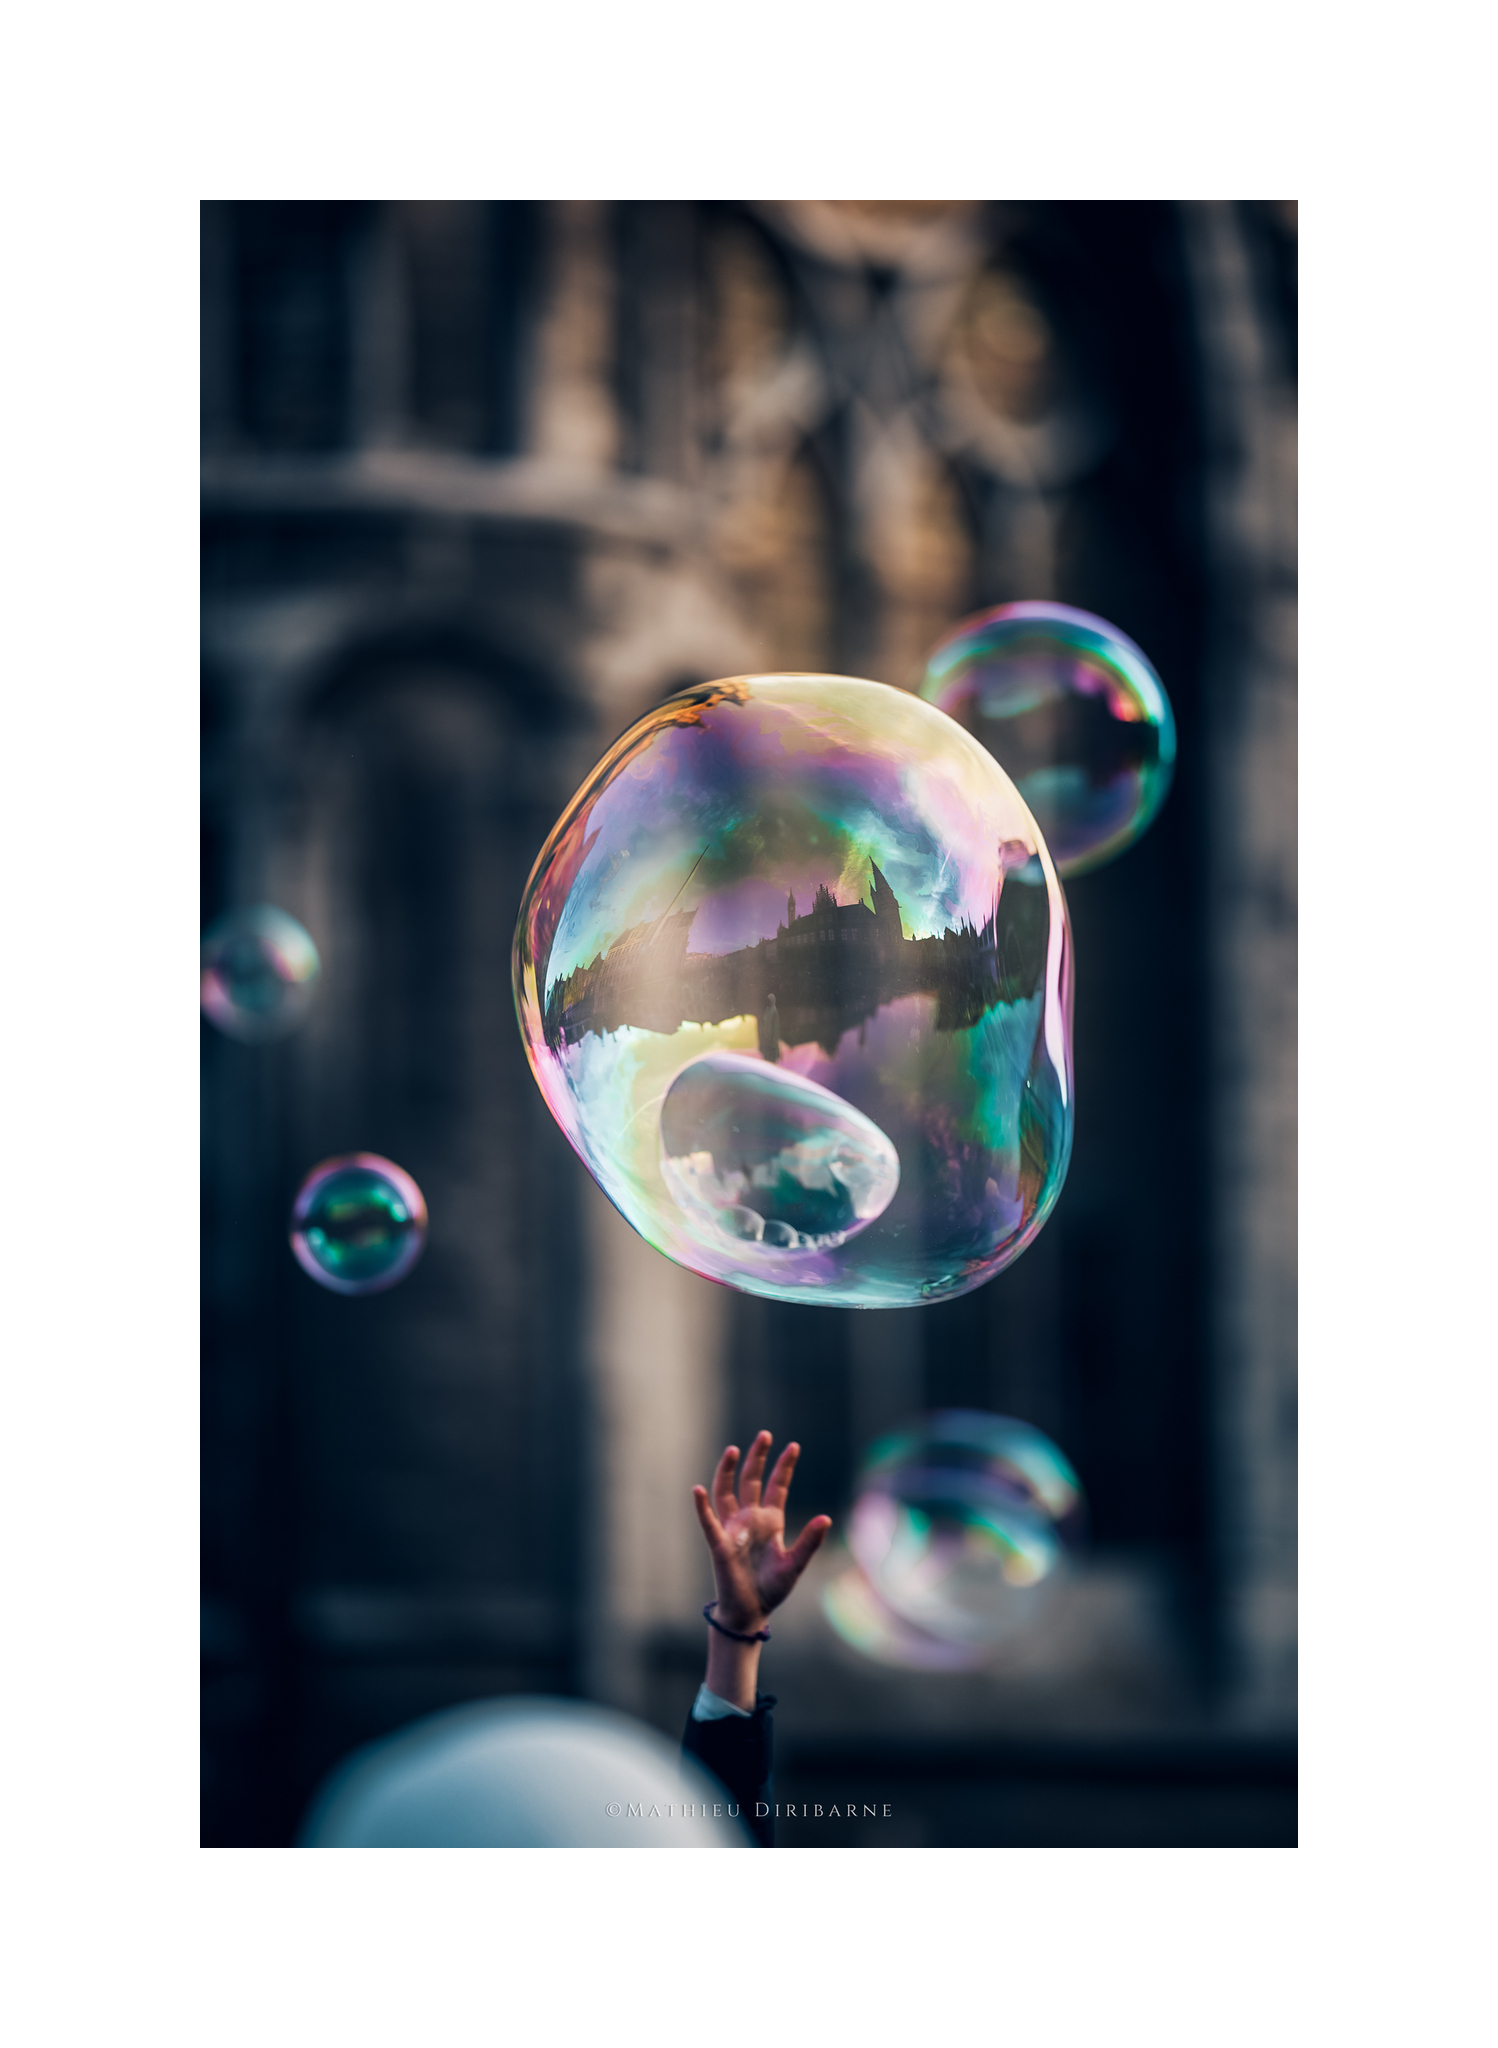 The Child and bubbles...